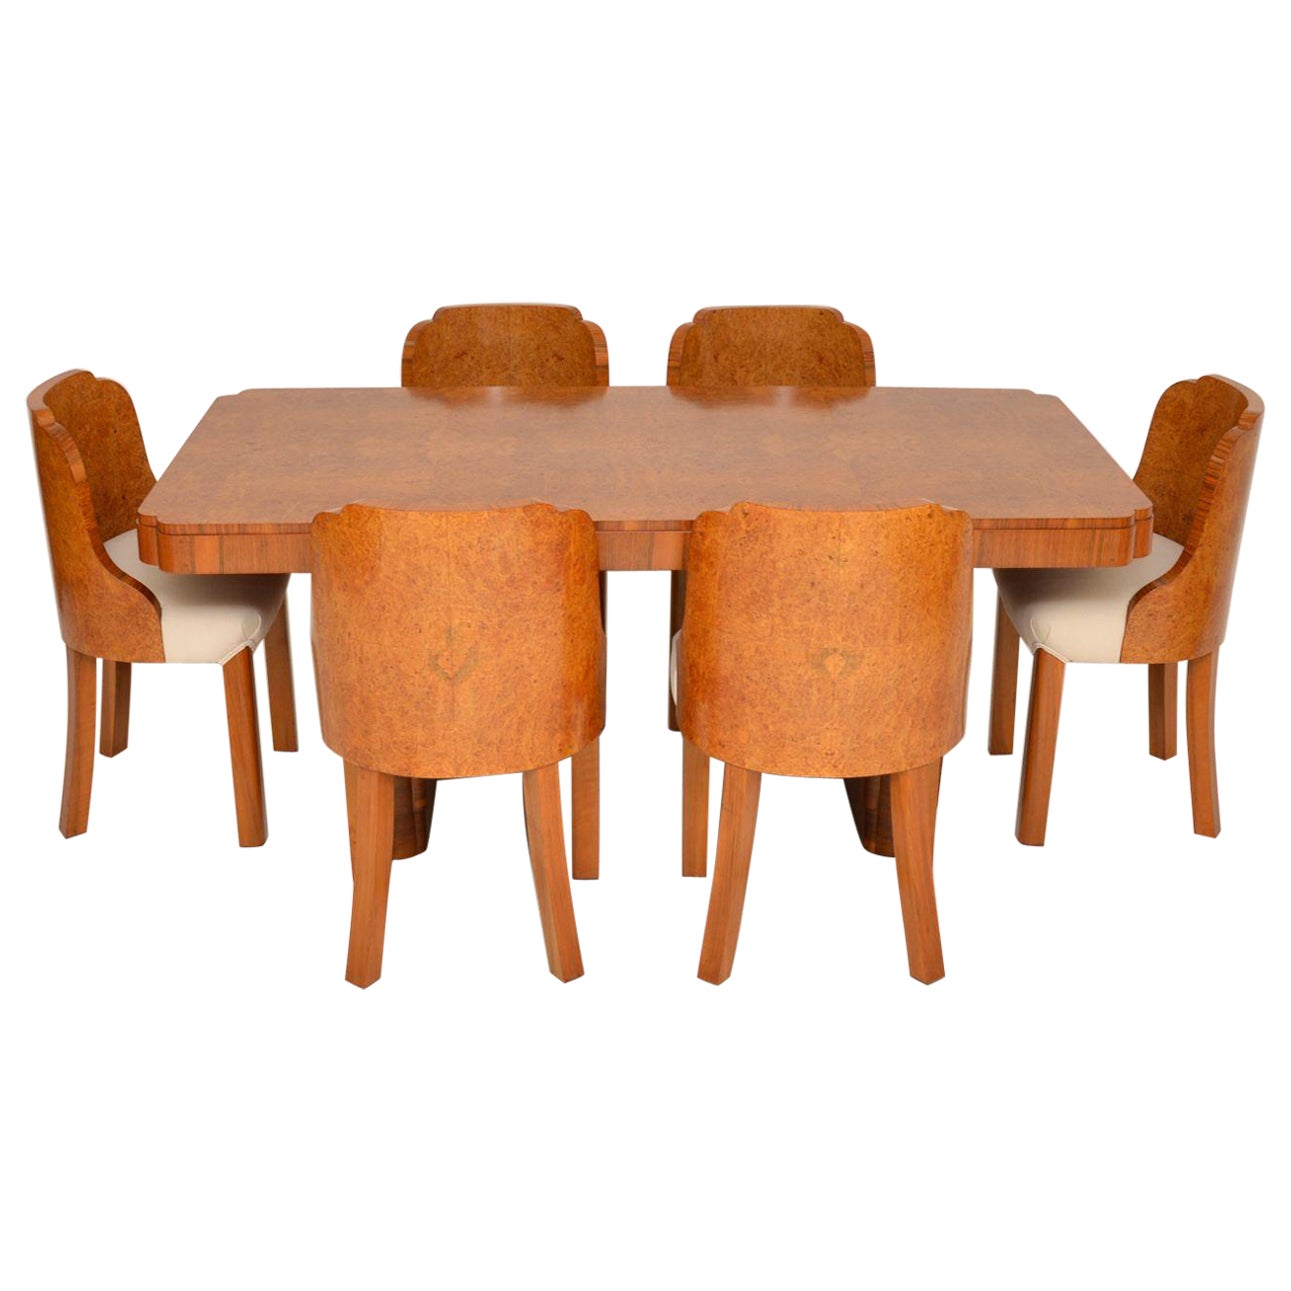 1930s Art Deco Burr Walnut Cloud Back Dining Table & Chairs